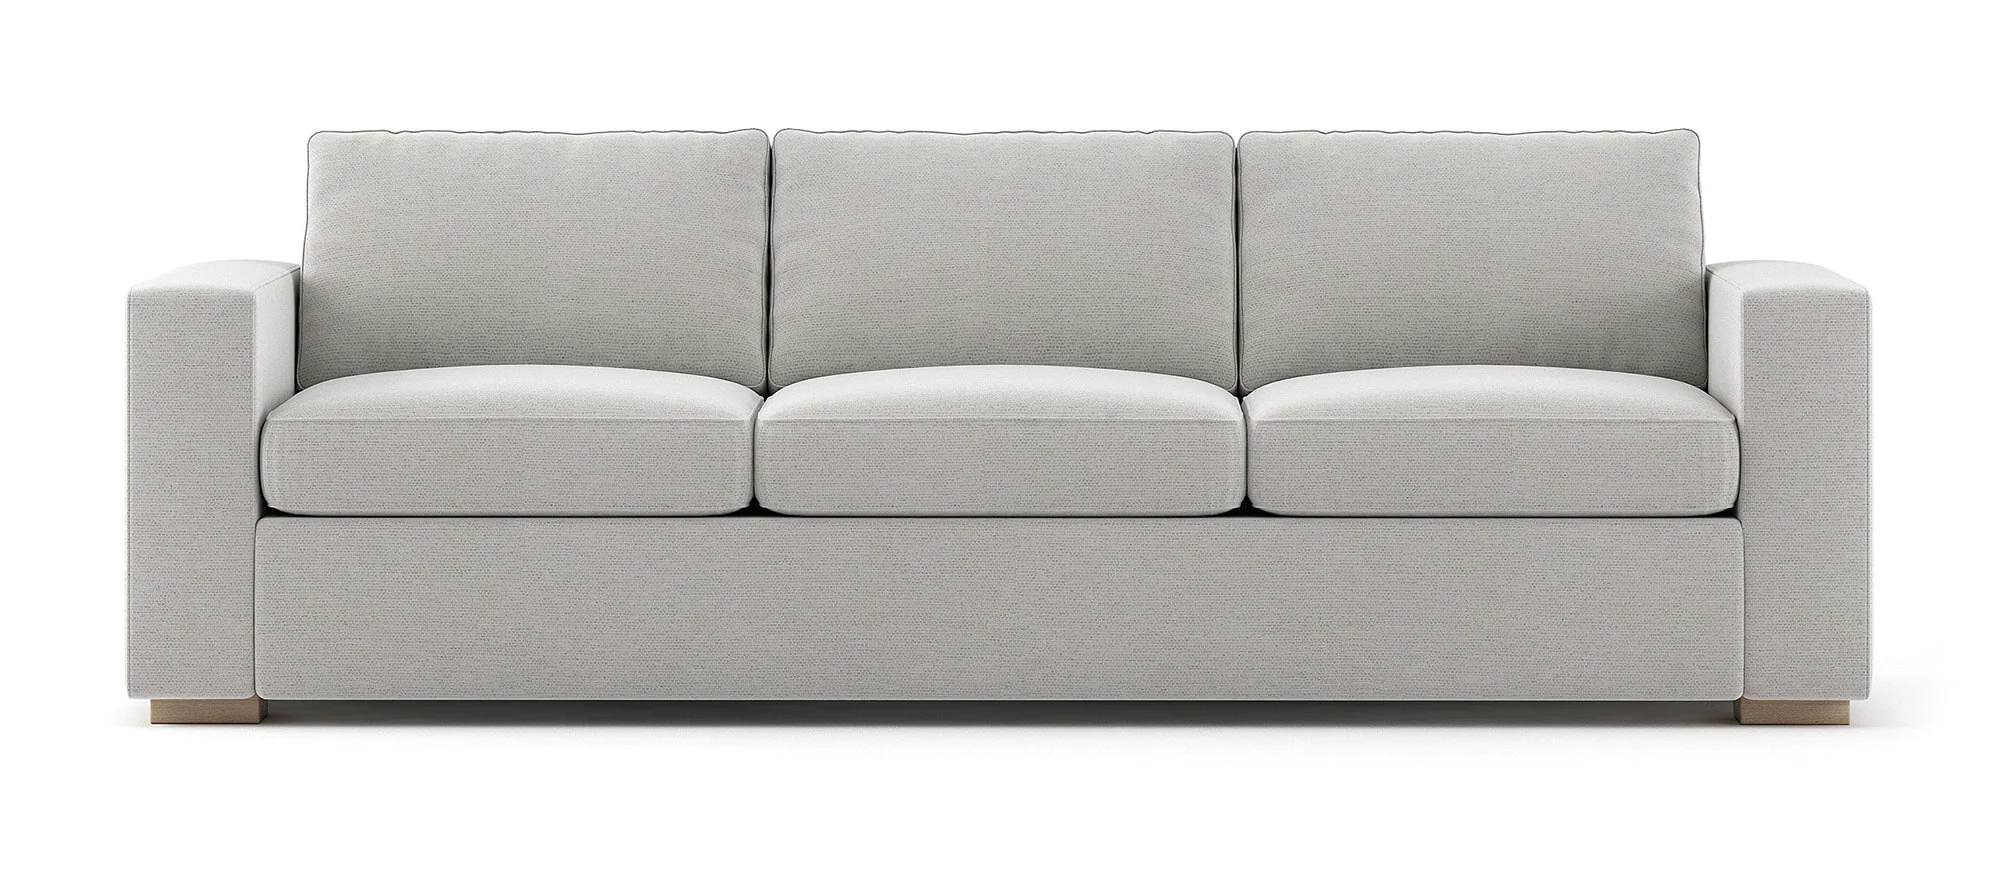 Couch Coverings Decoded: The Different Types of Sofa Material缩略图